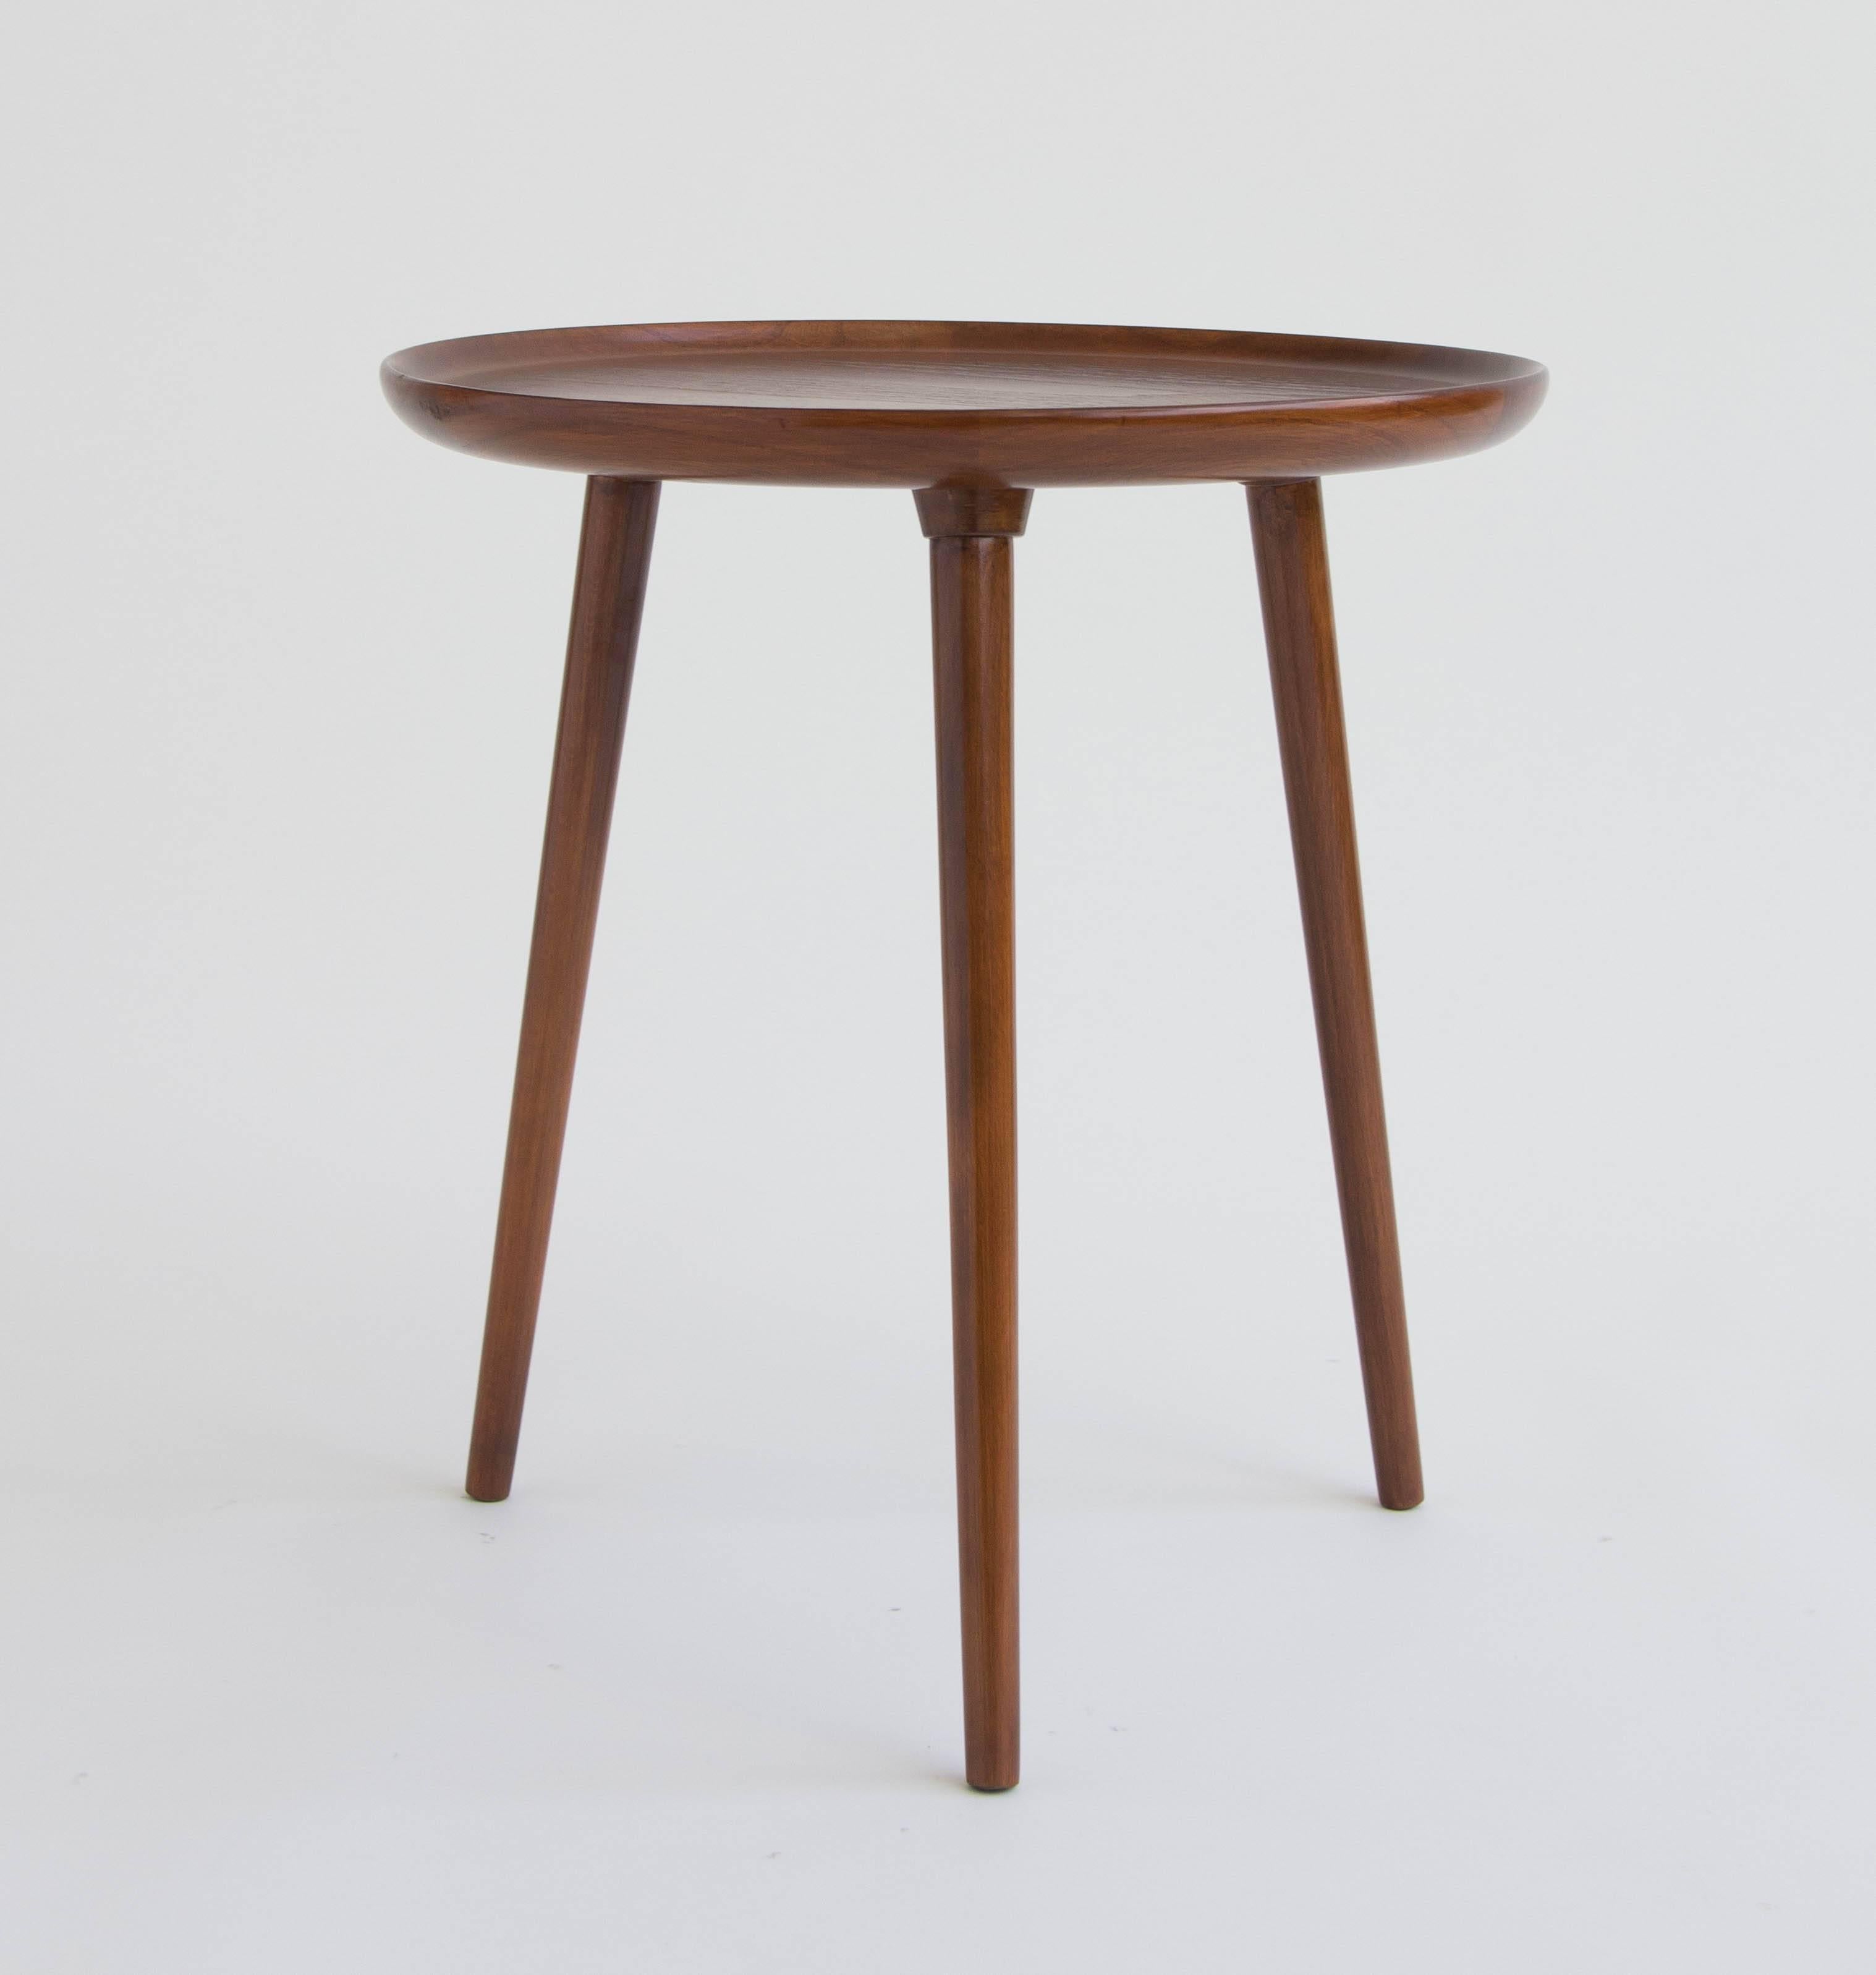 A round side table with three legs. Designed for Selig of Denmark, the piece is made of solid walnut, with tapered legs and slightly raised edges around the table top for a bowl effect. Stamped “Made in Denmark” on the underside of table.